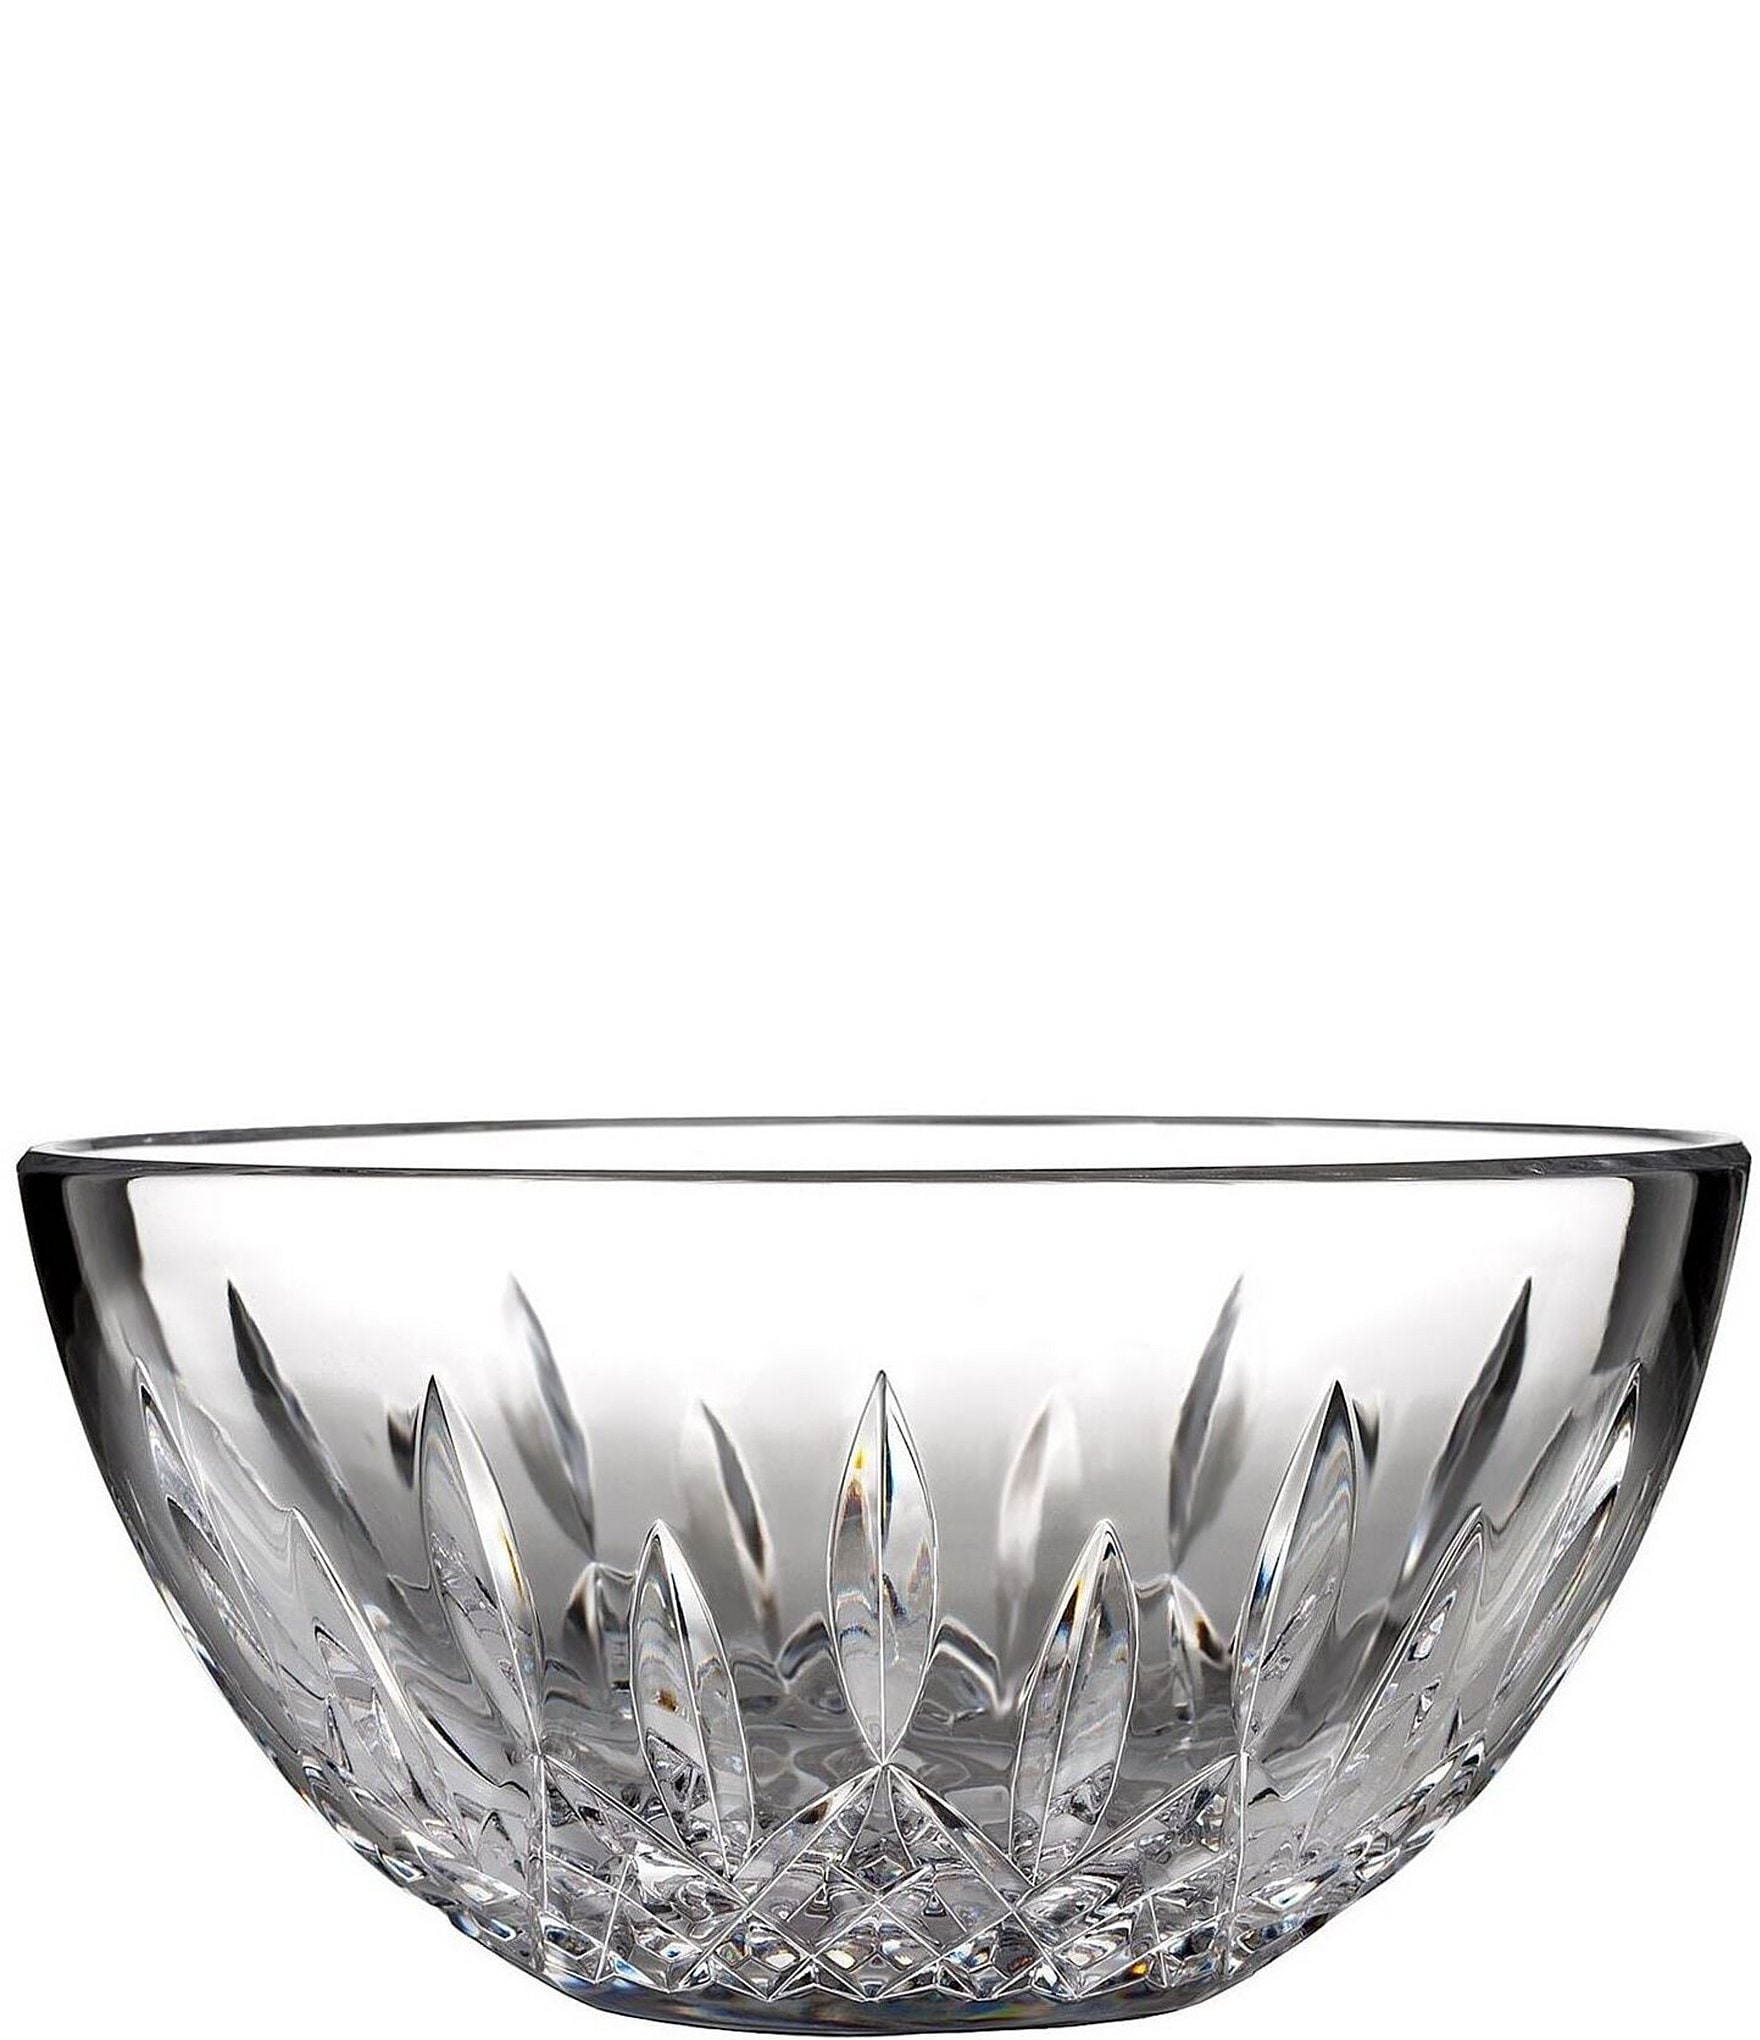 Waterford Crystal Cashel Posy 花瓶 キッチン